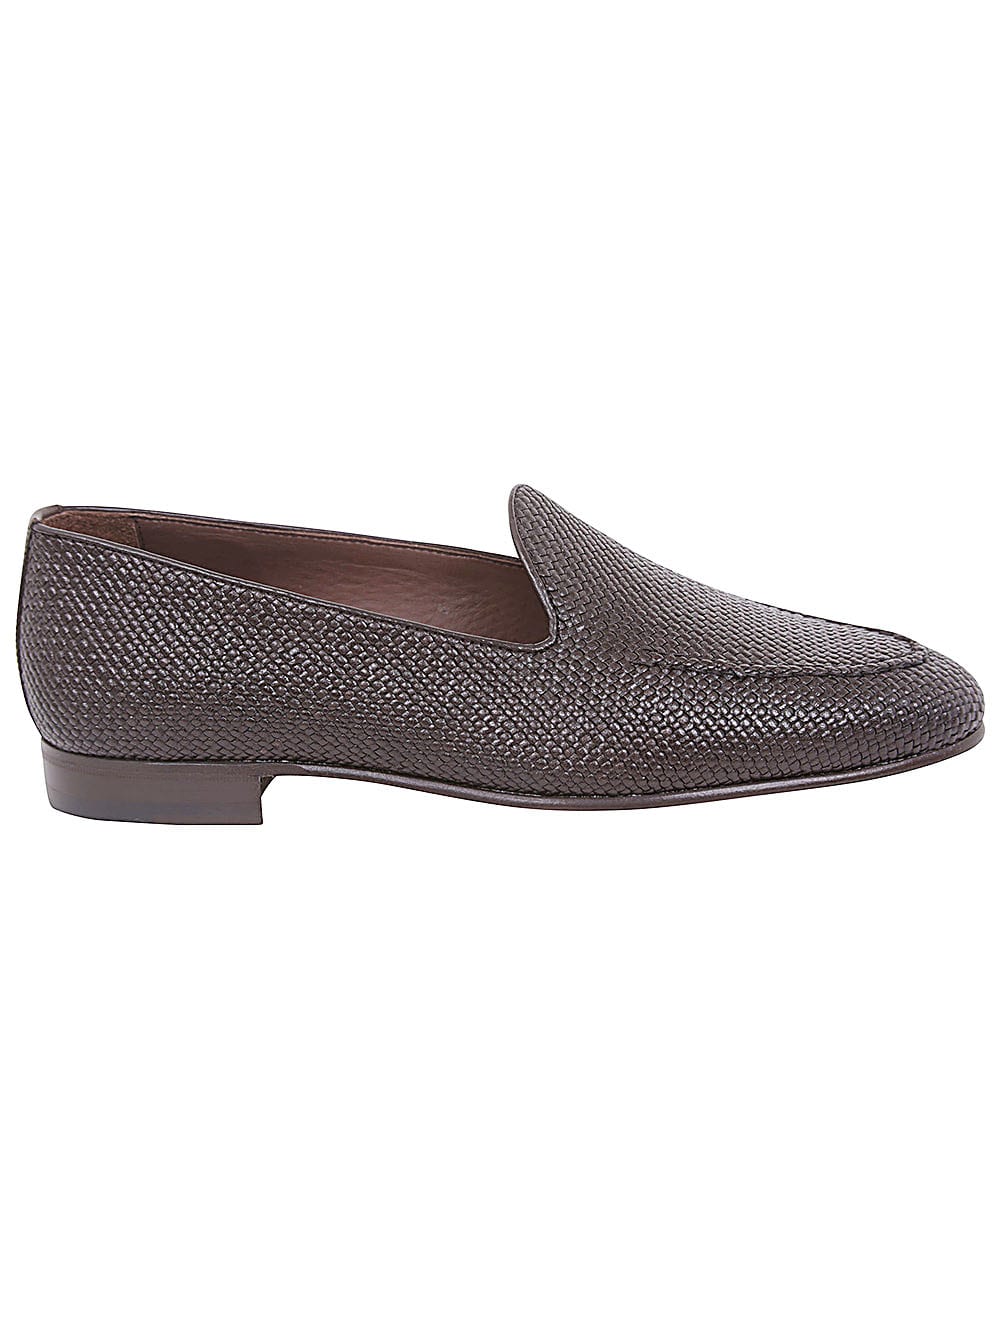 1707 Trenz Crust High Loafers